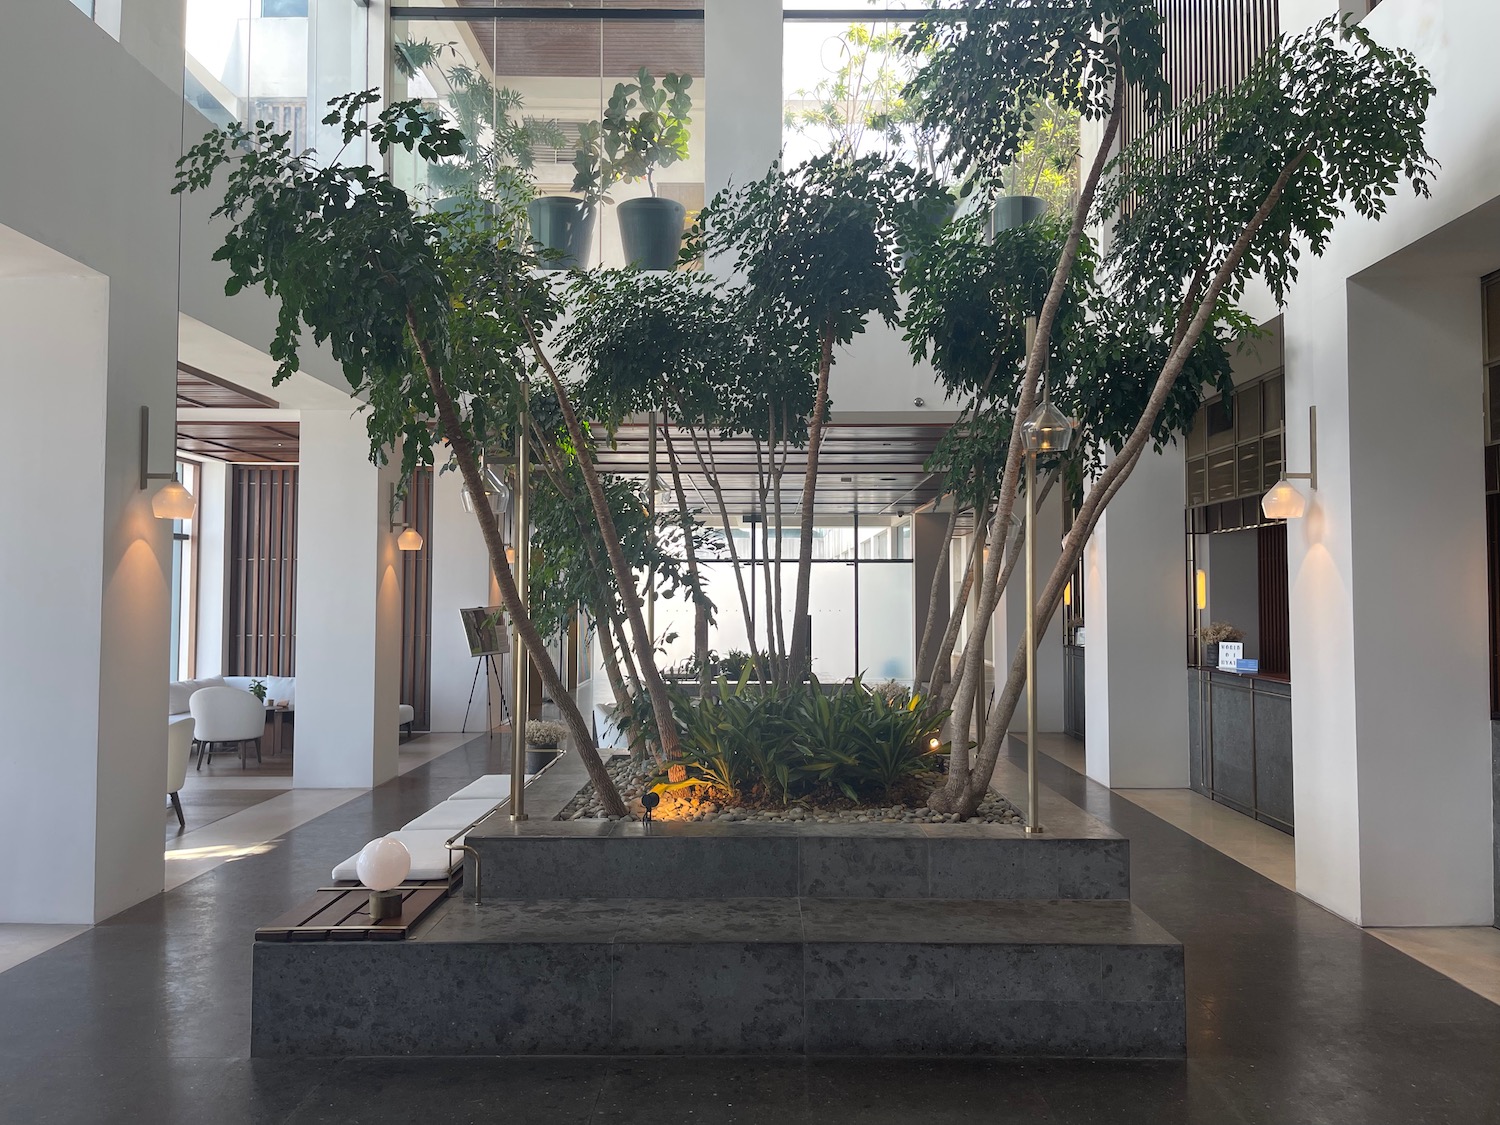 a large indoor planter with trees in a building